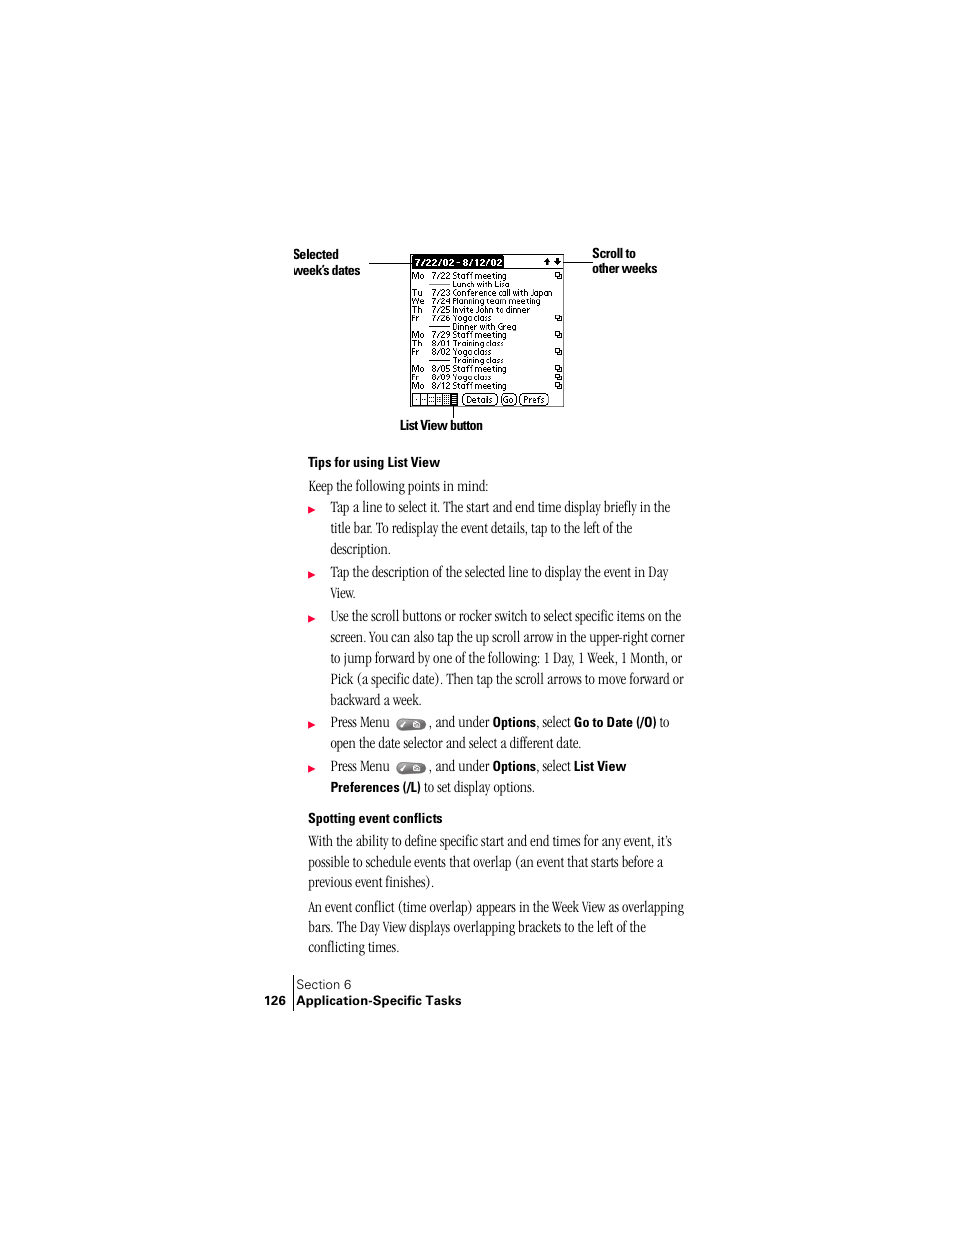 Tips for using list view, Spotting event conflicts | Handspring Treo 300 User Manual | Page 134 / 286